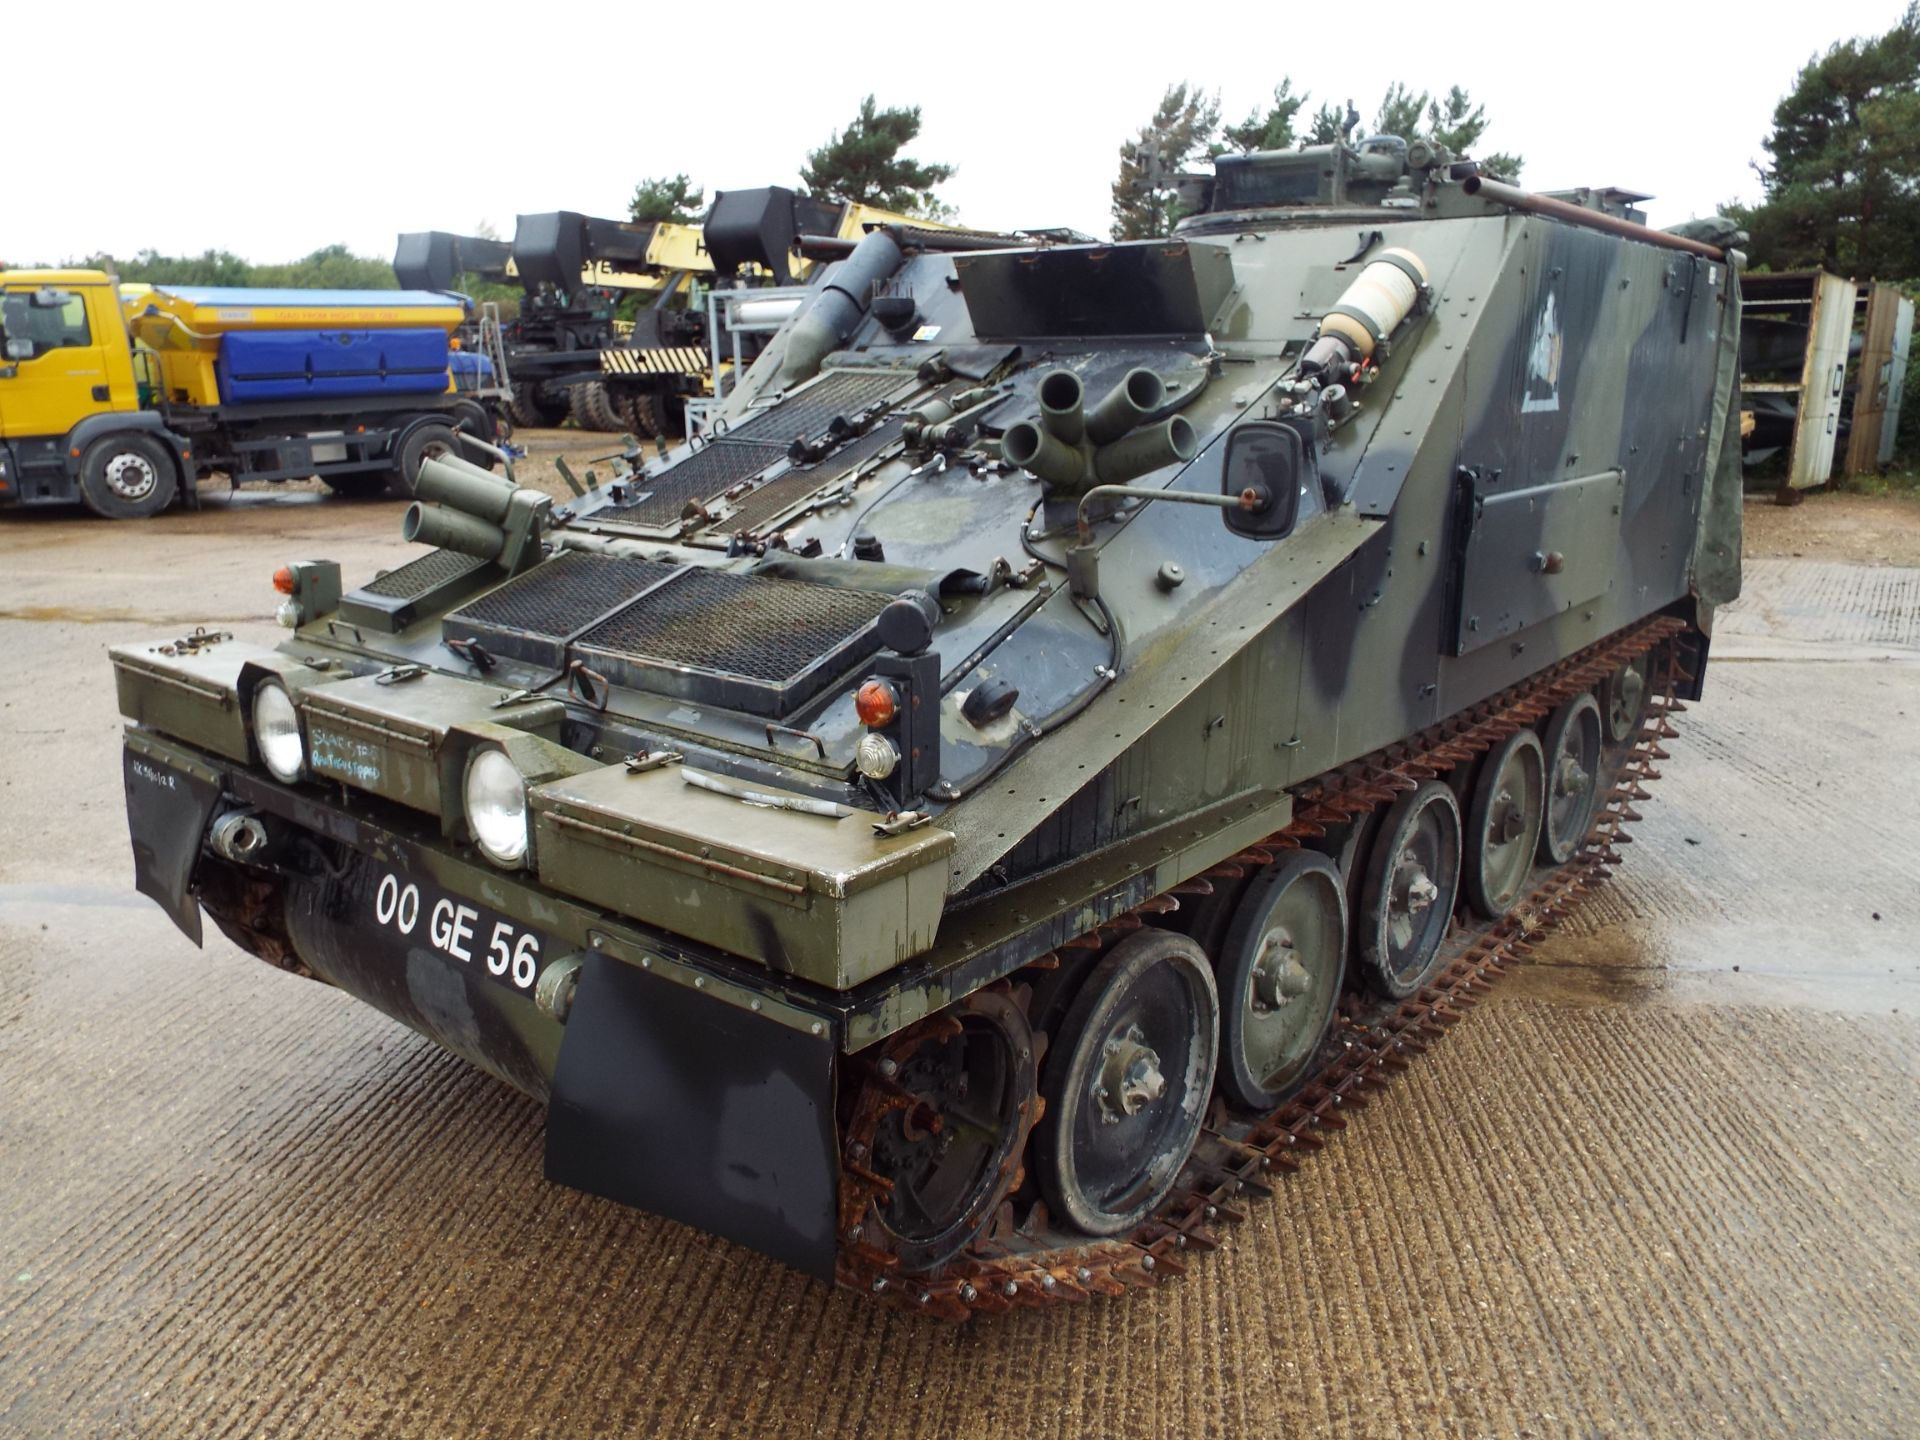 CVRT (Combat Vehicle Reconnaissance Tracked) FV105 Sultan Armoured Personnel Carrier - Image 3 of 31